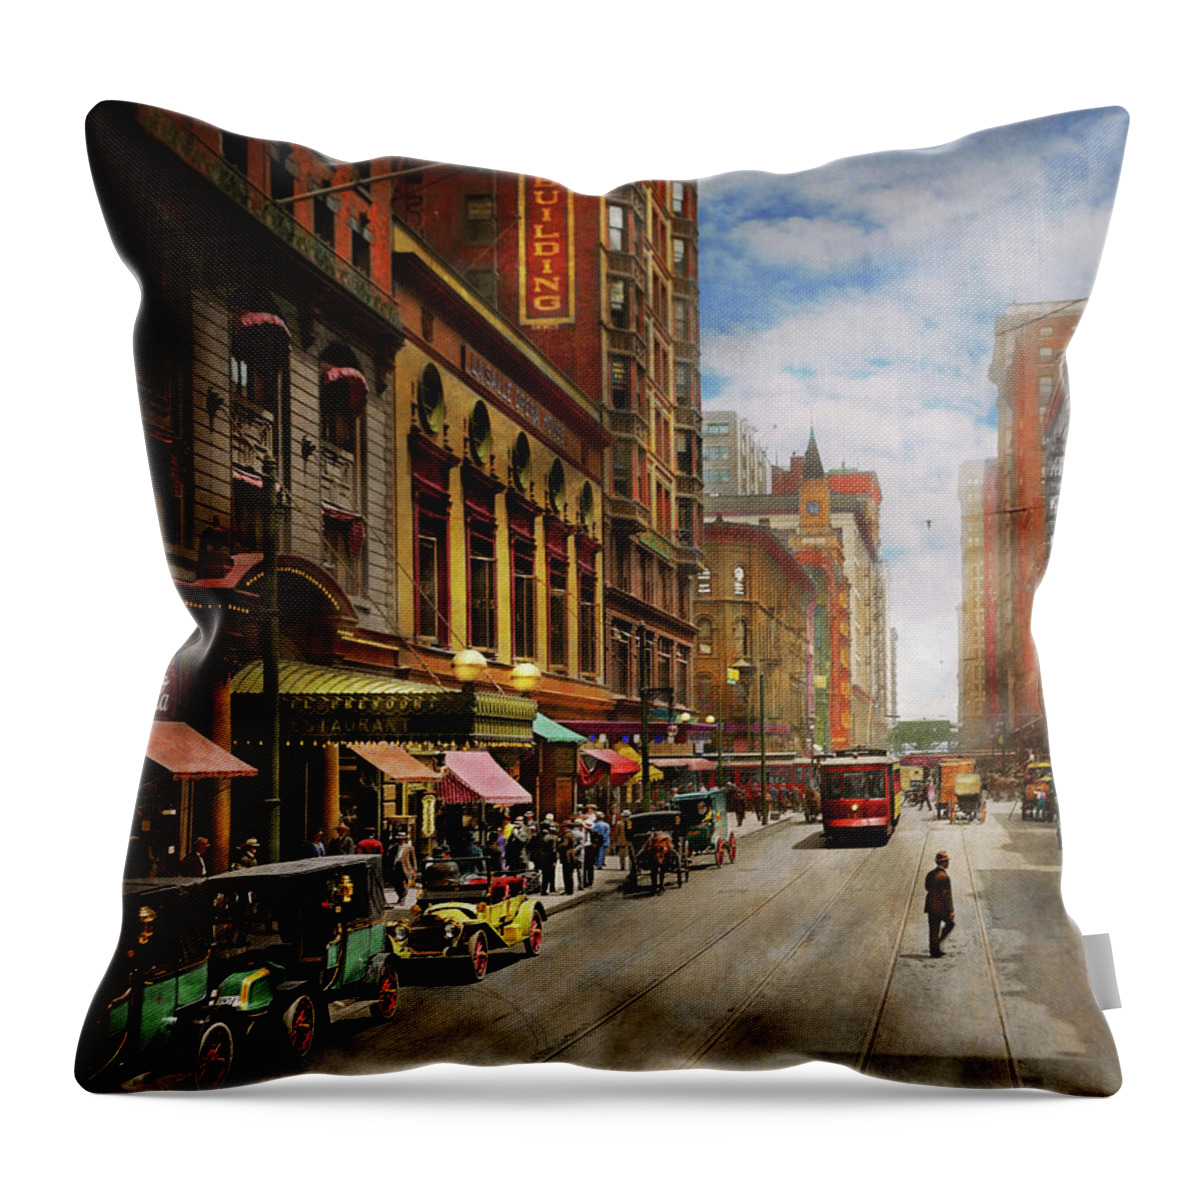 Chicago Throw Pillow featuring the photograph City - Chicago IL - The Brevoort Hotel 1910 by Mike Savad